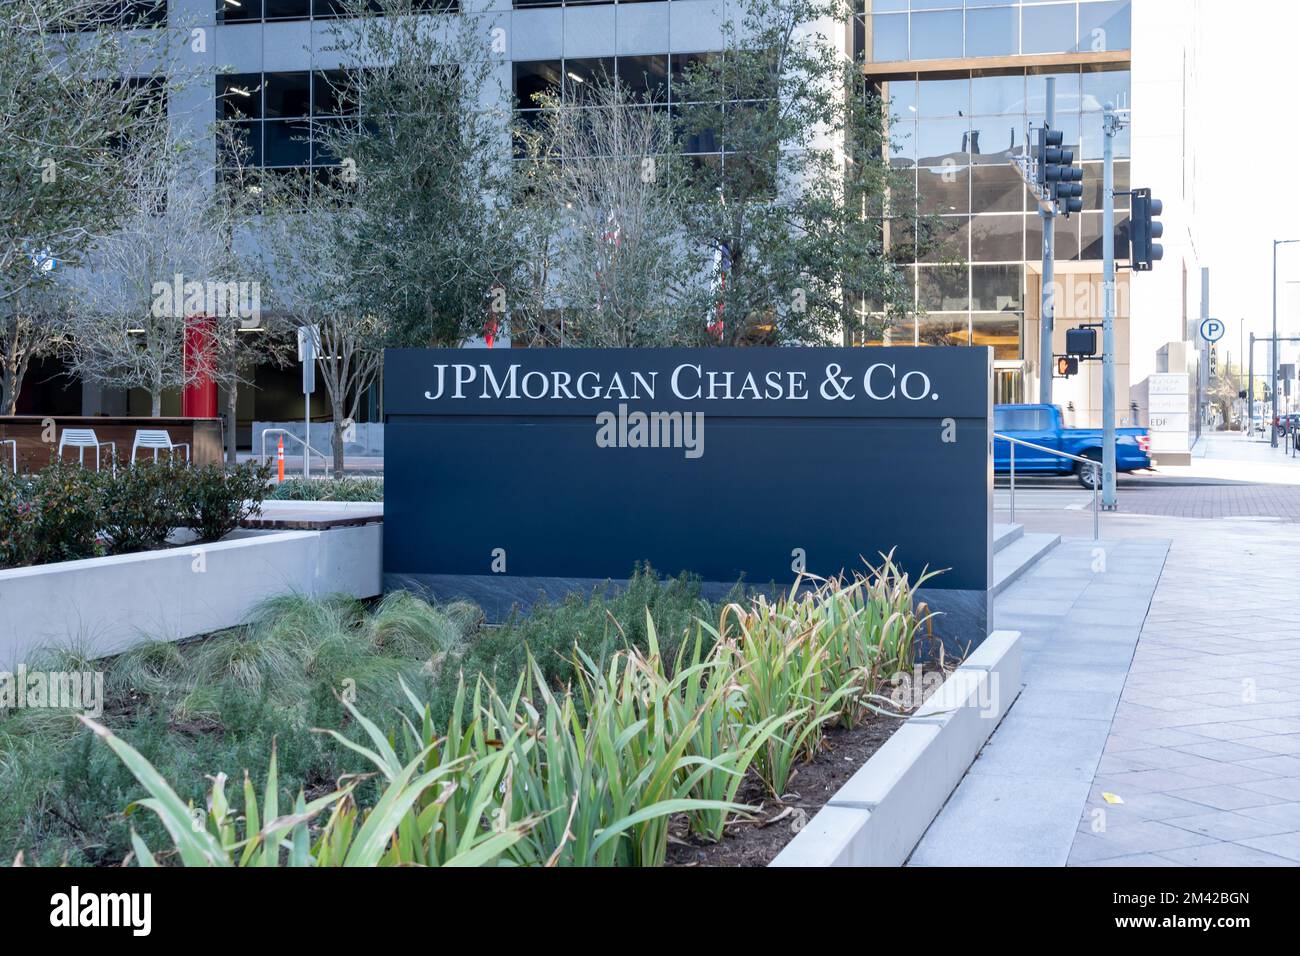 Houston, Texas, USA - February 27, 2022: JPMorgan Chase Co.’s sign at its office building in Houston Stock Photo